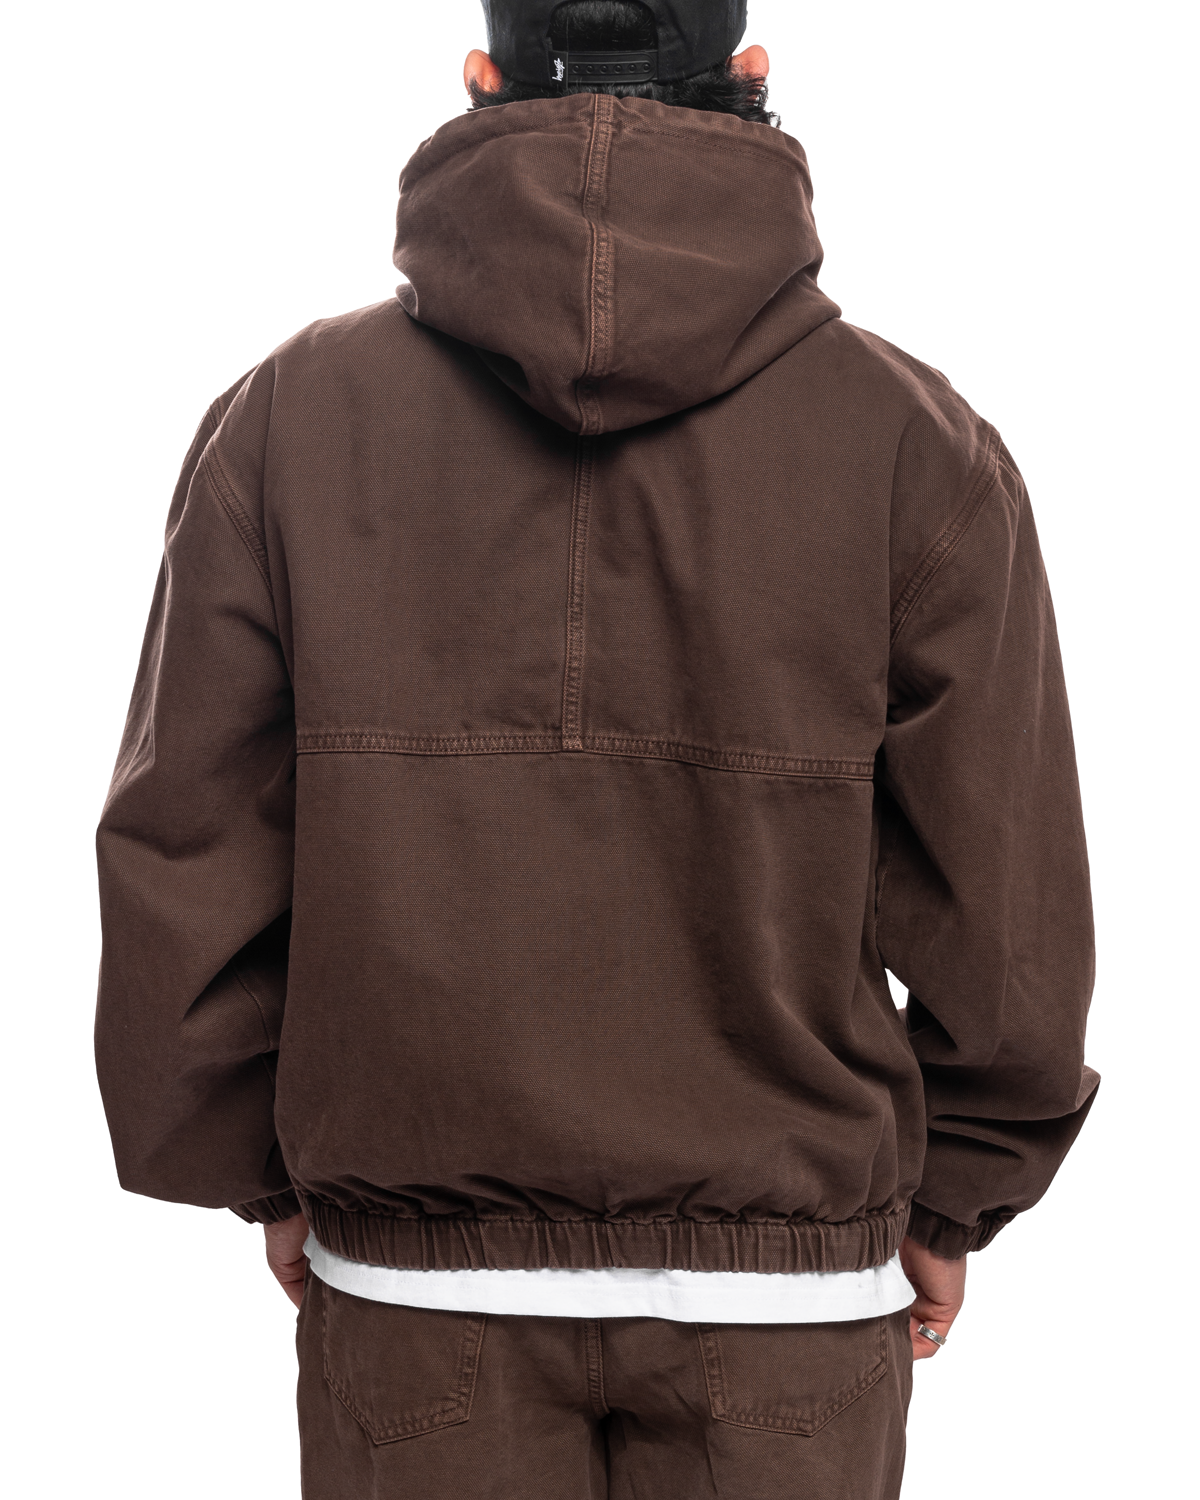 Work Jacket Unlined Canvas Brown